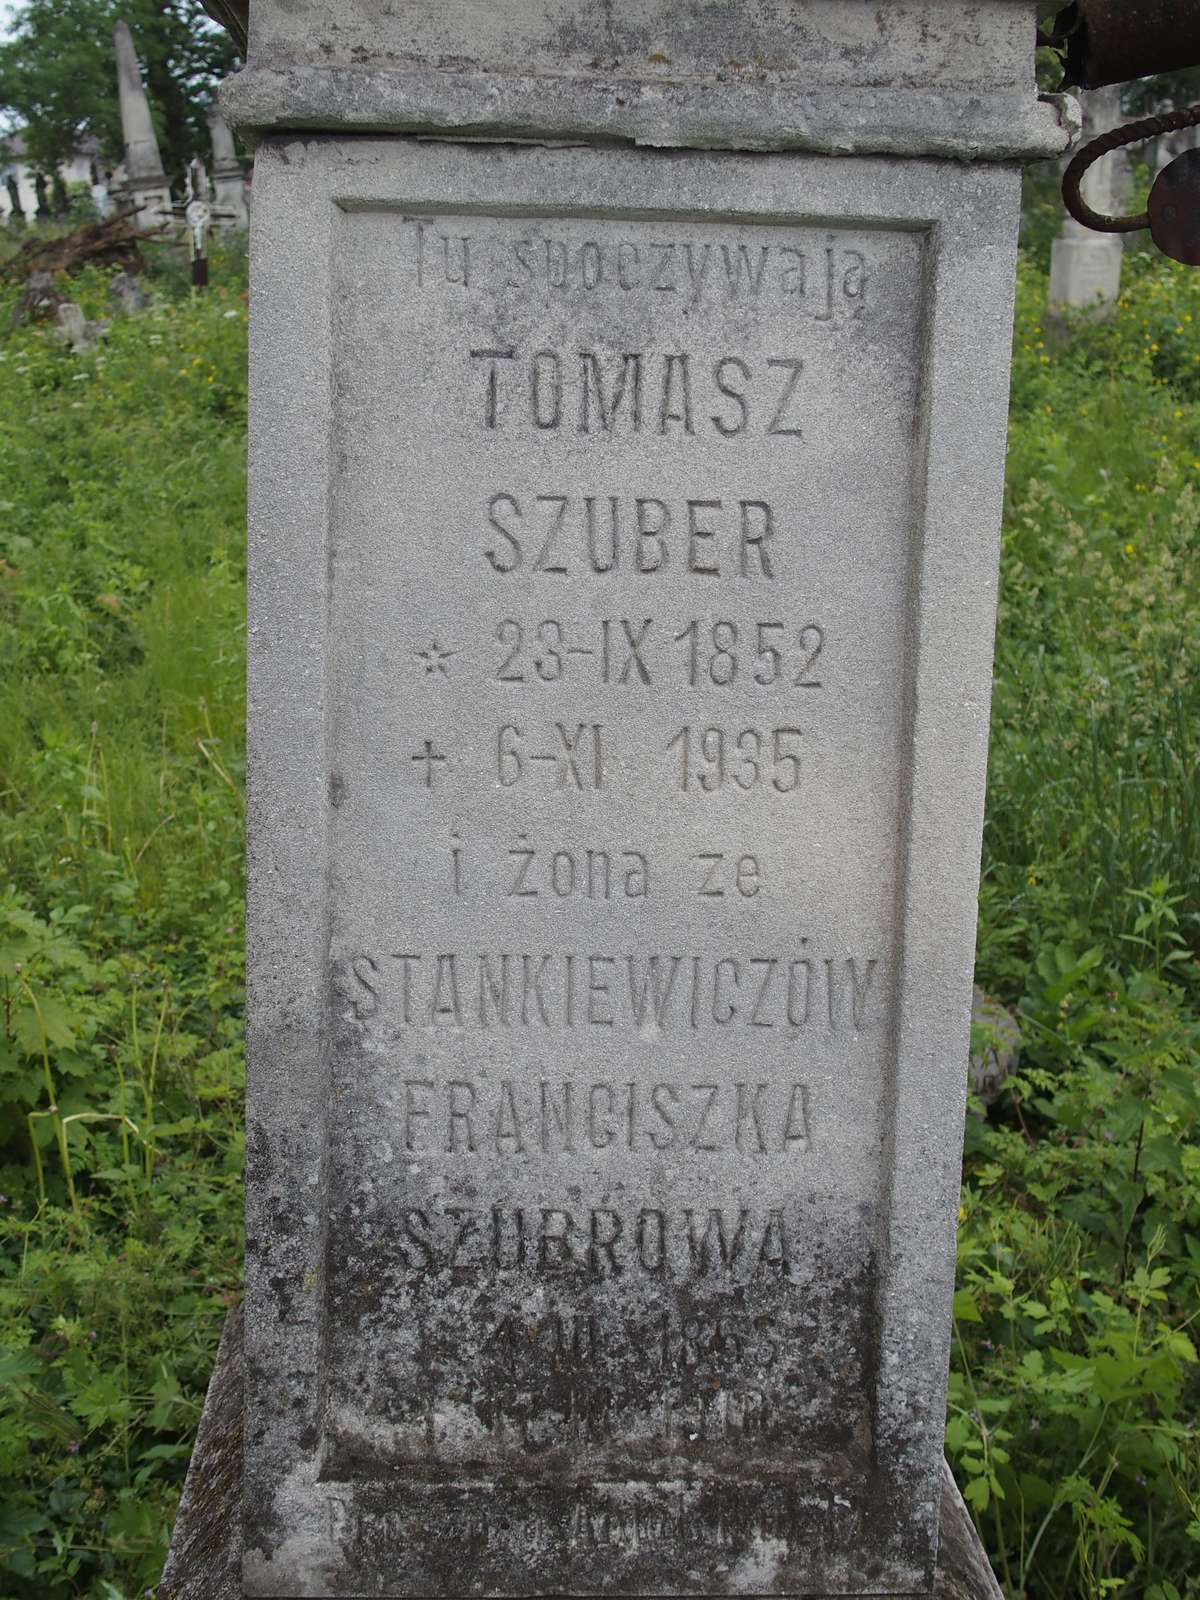 Tomas and Franciszka Szuber tombstone, Zbarazh cemetery, as of 2018.